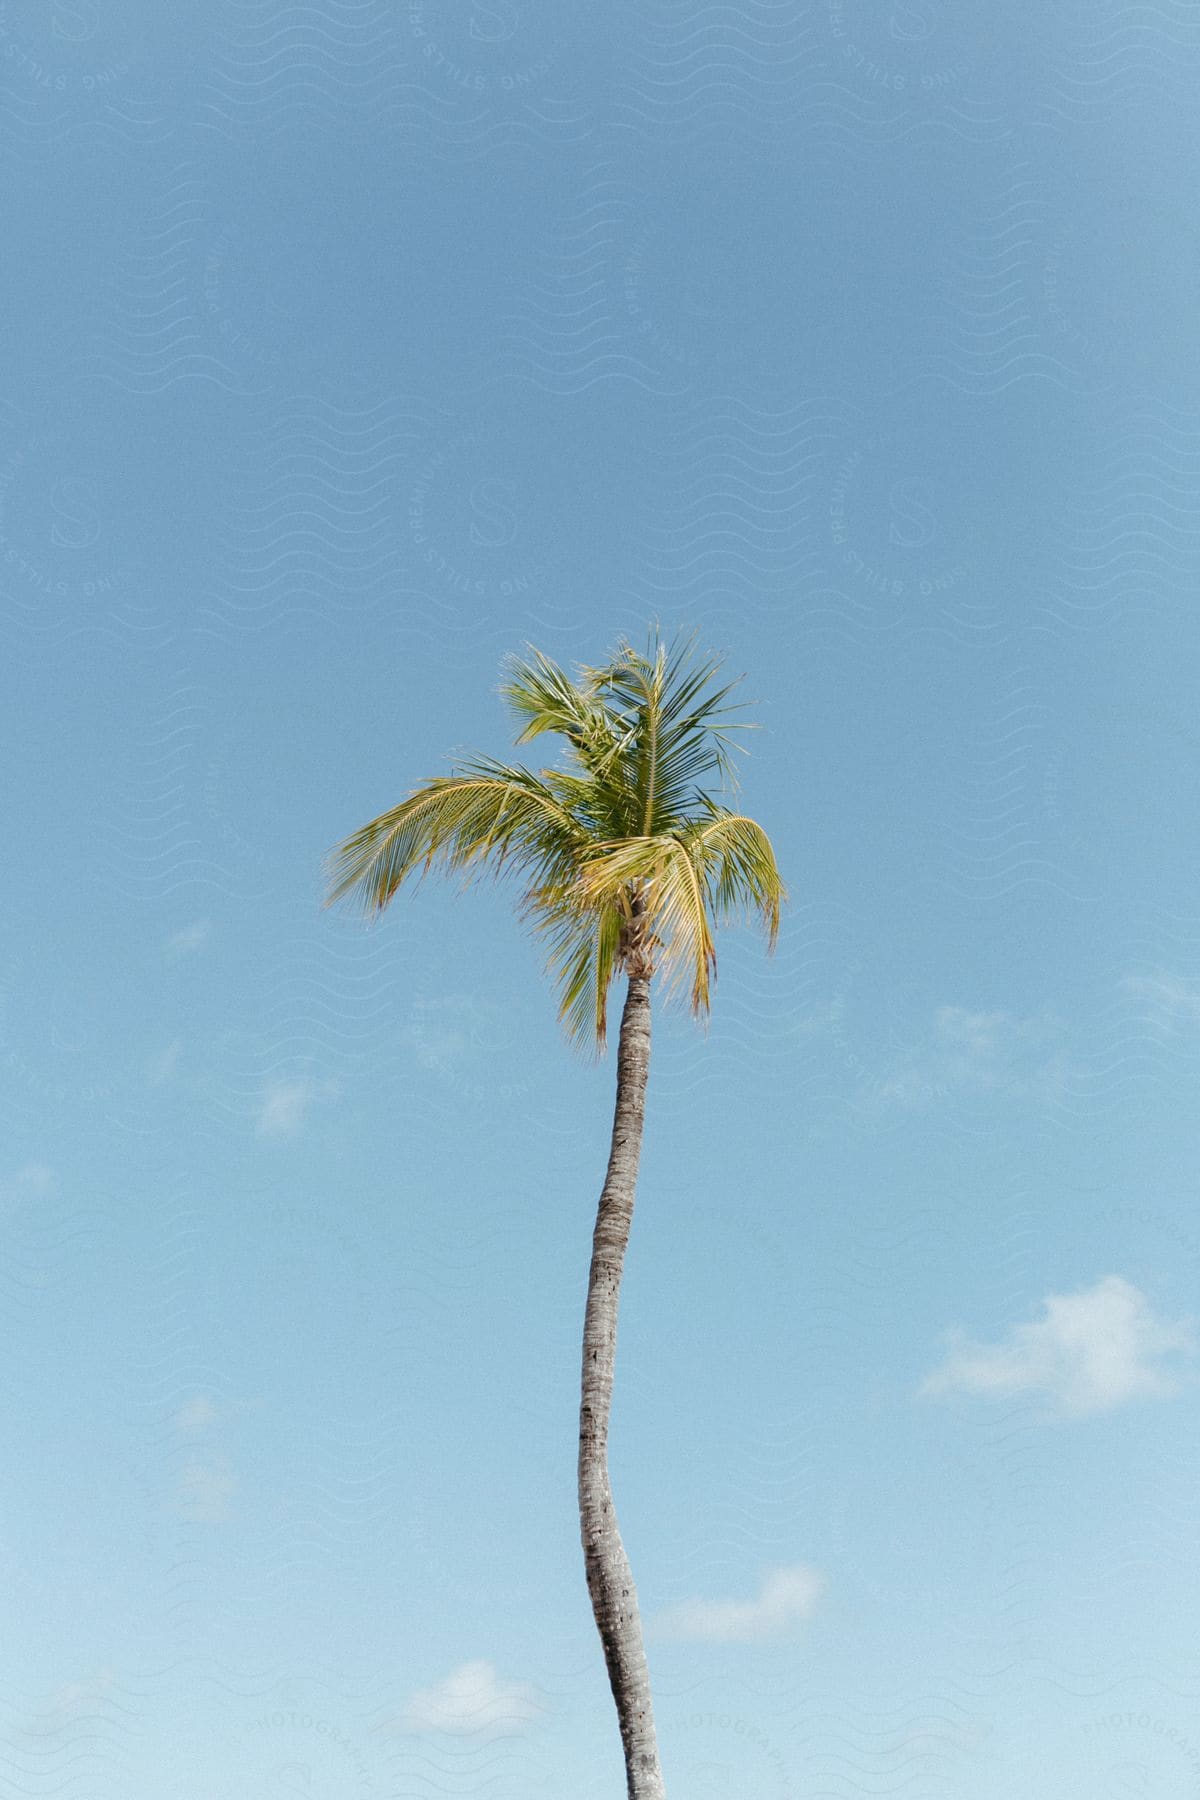 A tall palm tree in an outdoor setting during the day